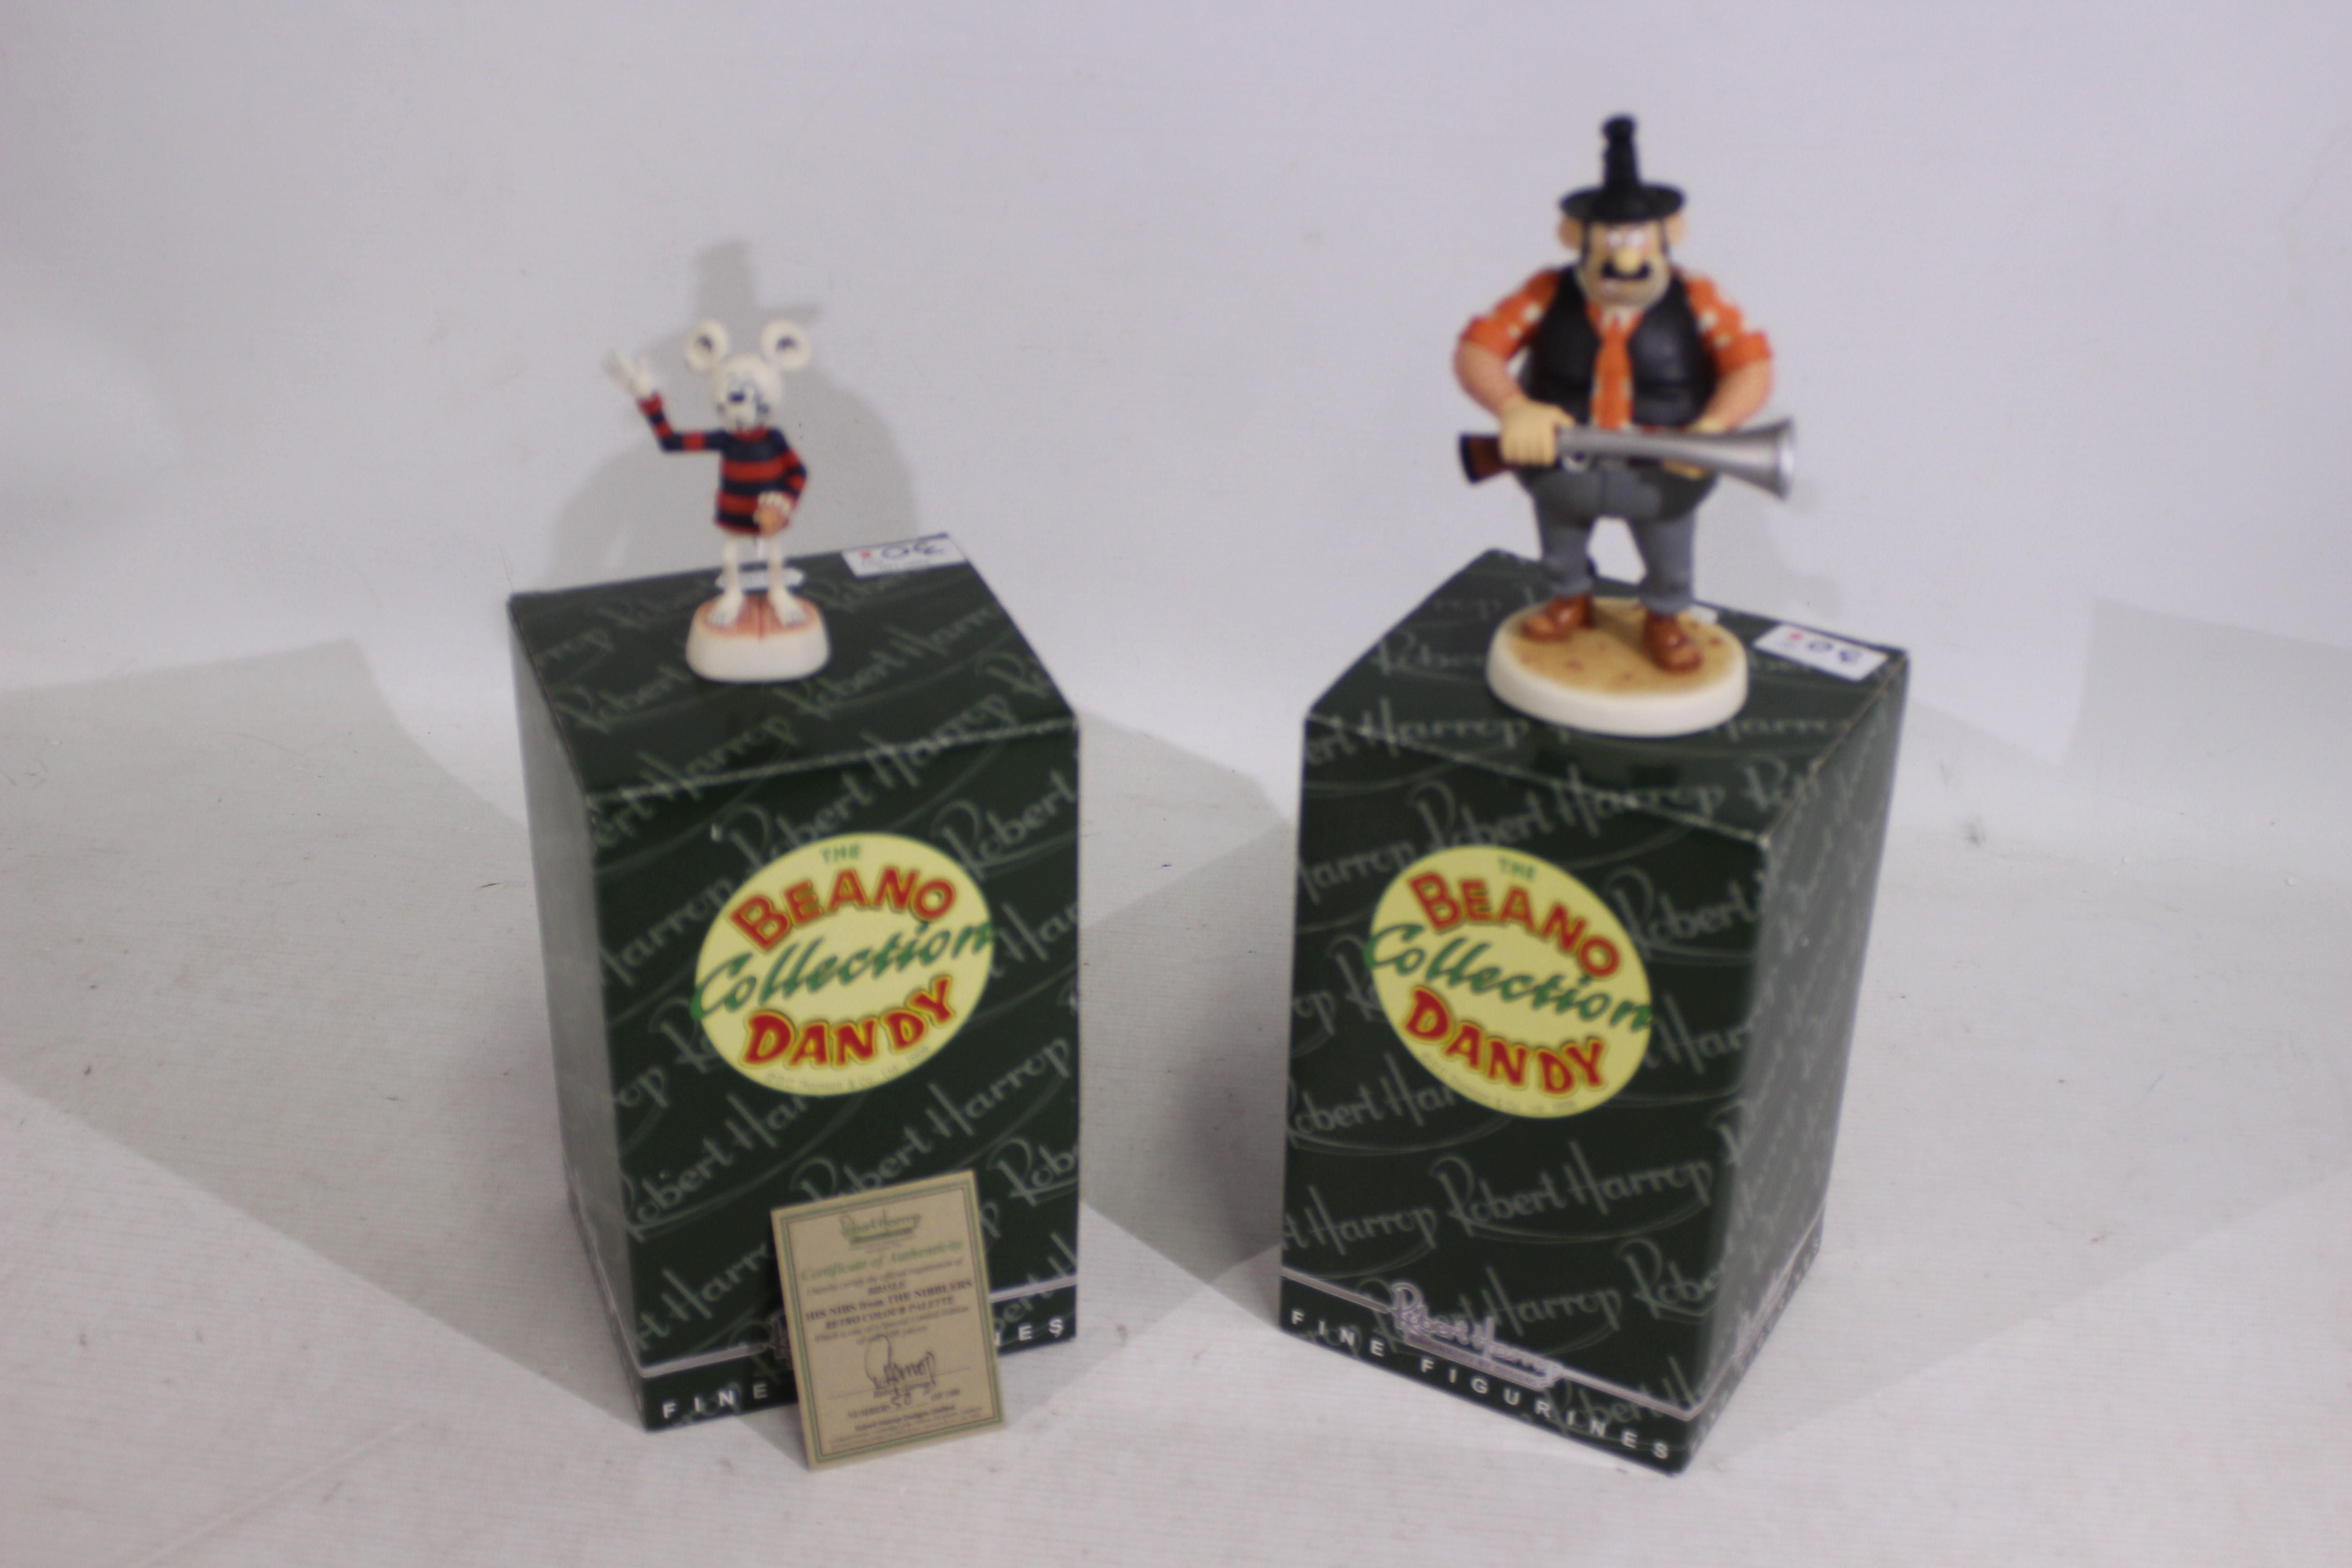 Robert Harrop - A pair of Robert Harrop resin figures from the Bean and Dandy Collection consisting